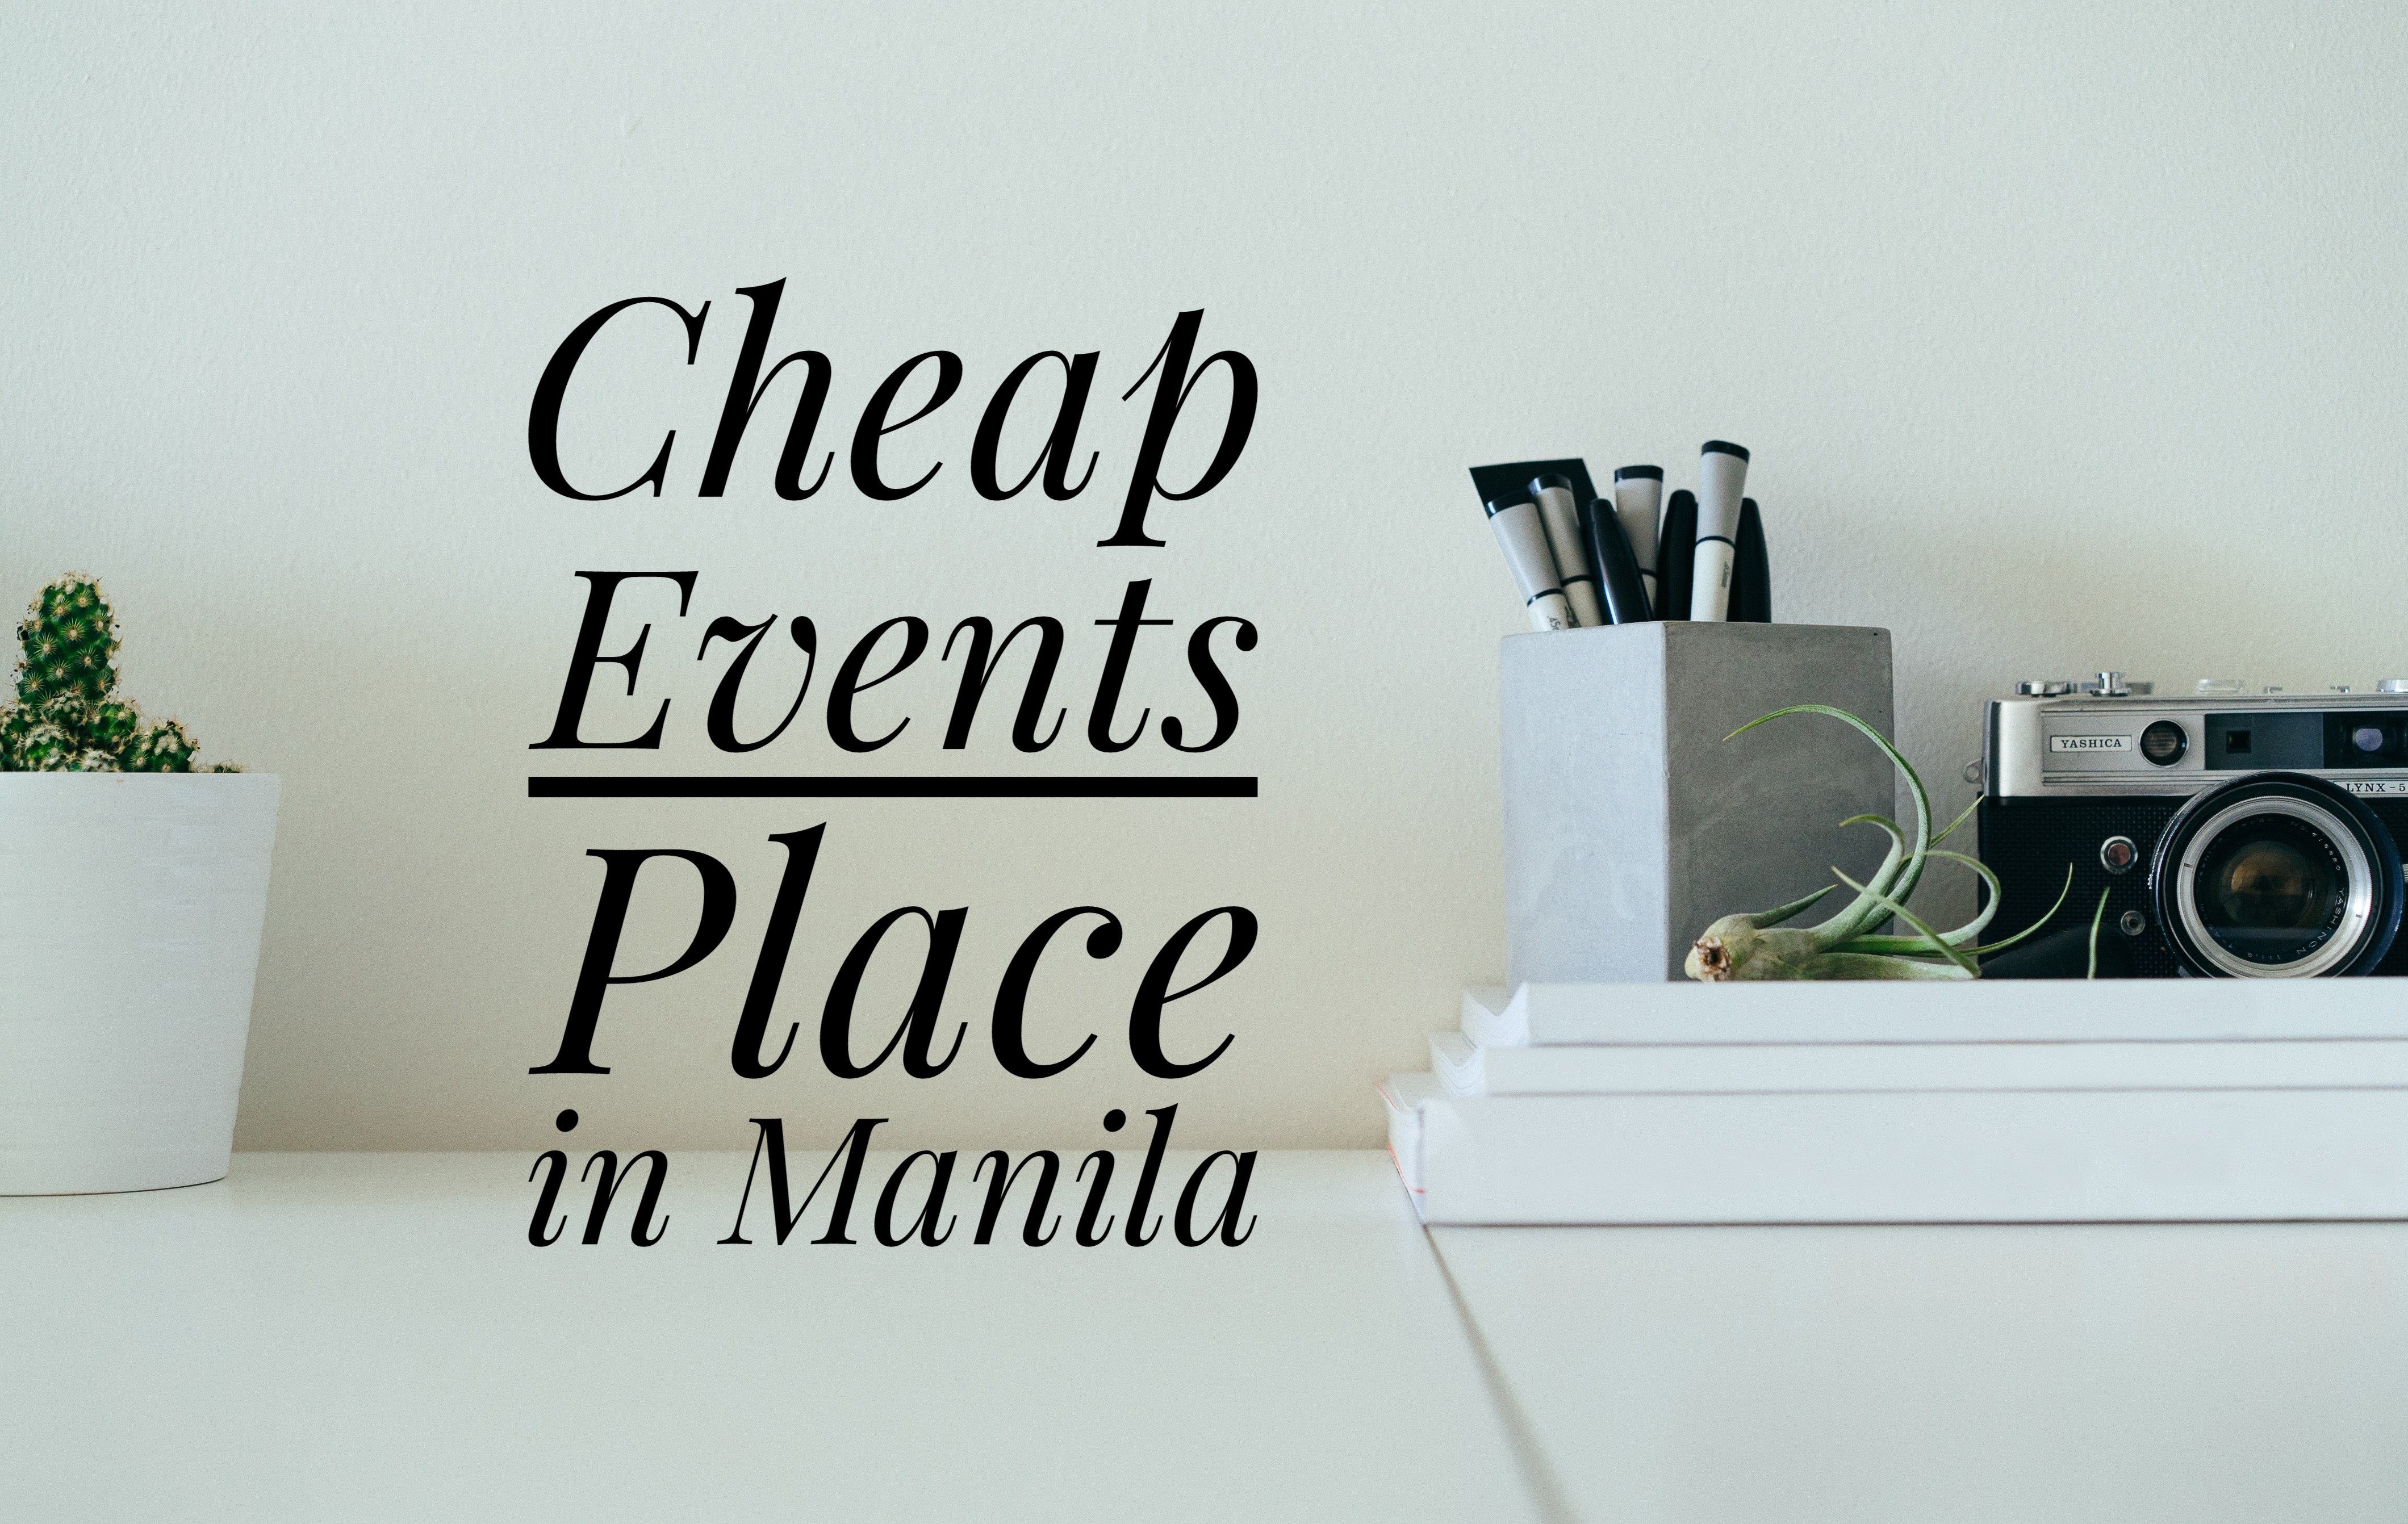 Cheap Events Place in Manila: What Event?